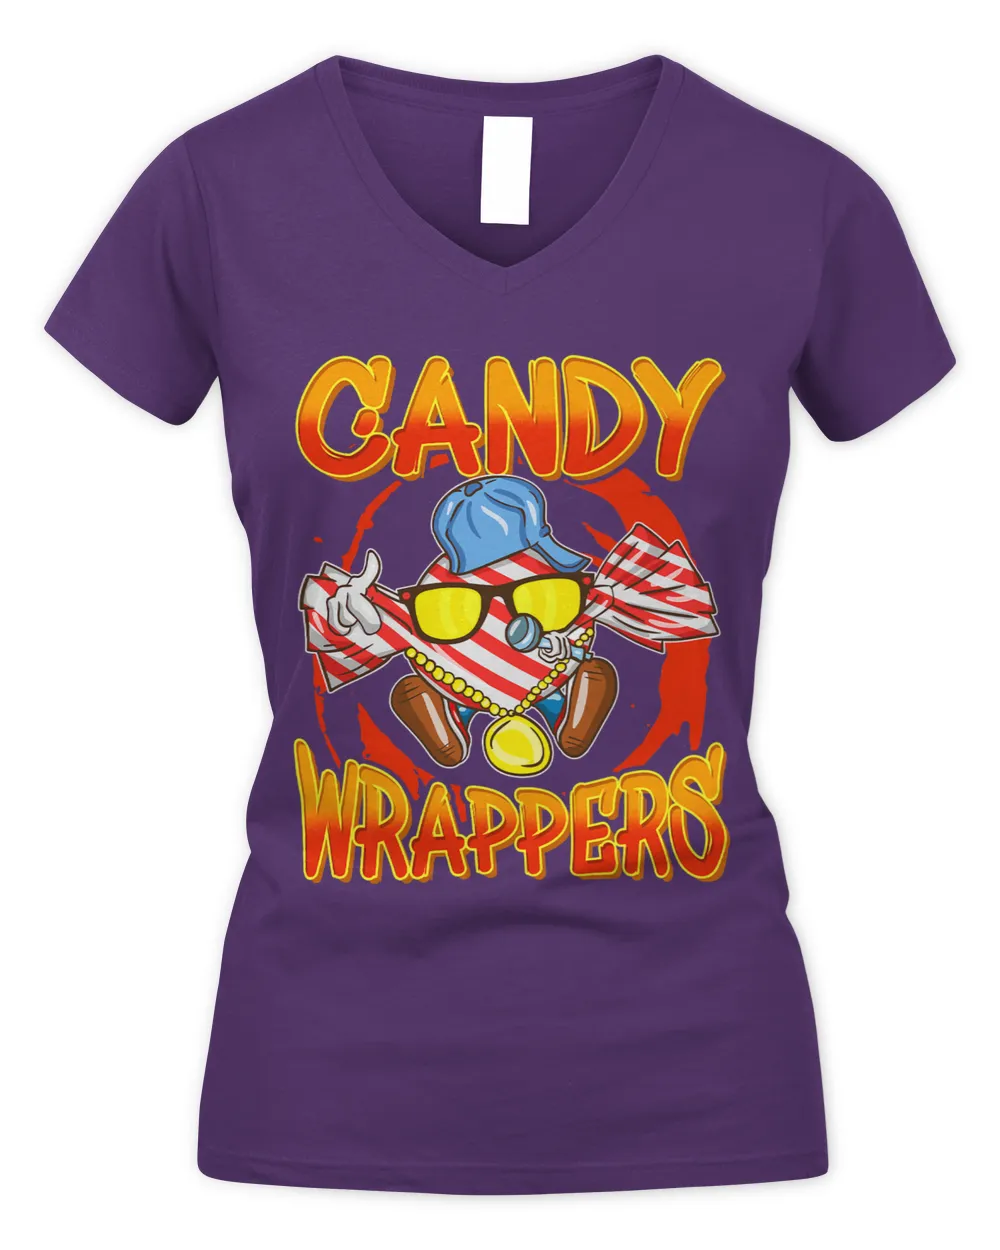 Rapping Candy Wrappers Super Funny Rapper Who Loves Candy